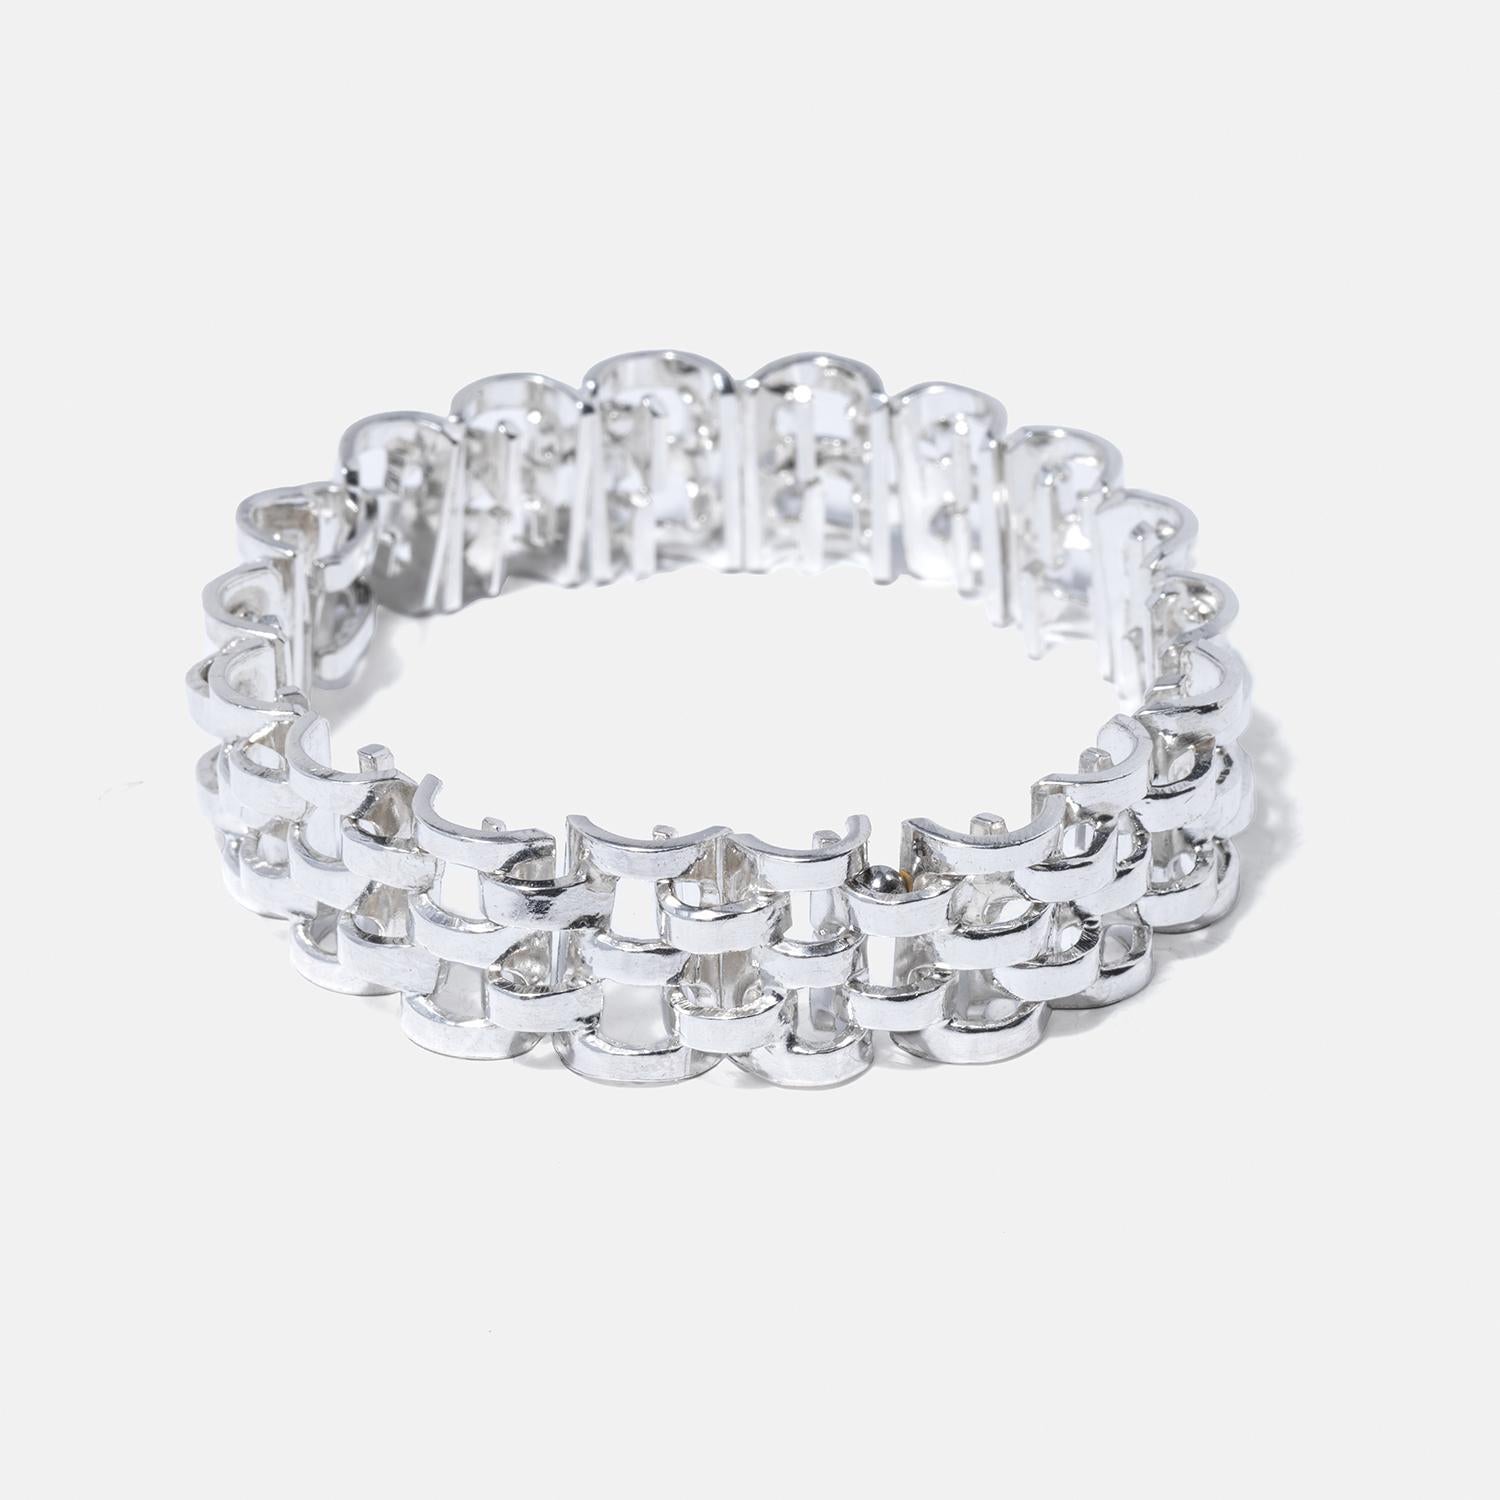 This elegant bracelet is crafted from sterling silver rectangles linked tightly to form a design reminiscent of chain mail. The links have a brilliant white sheen, bring a touch of radiant armor to any outfit. It closes easily with a hook, ensuring